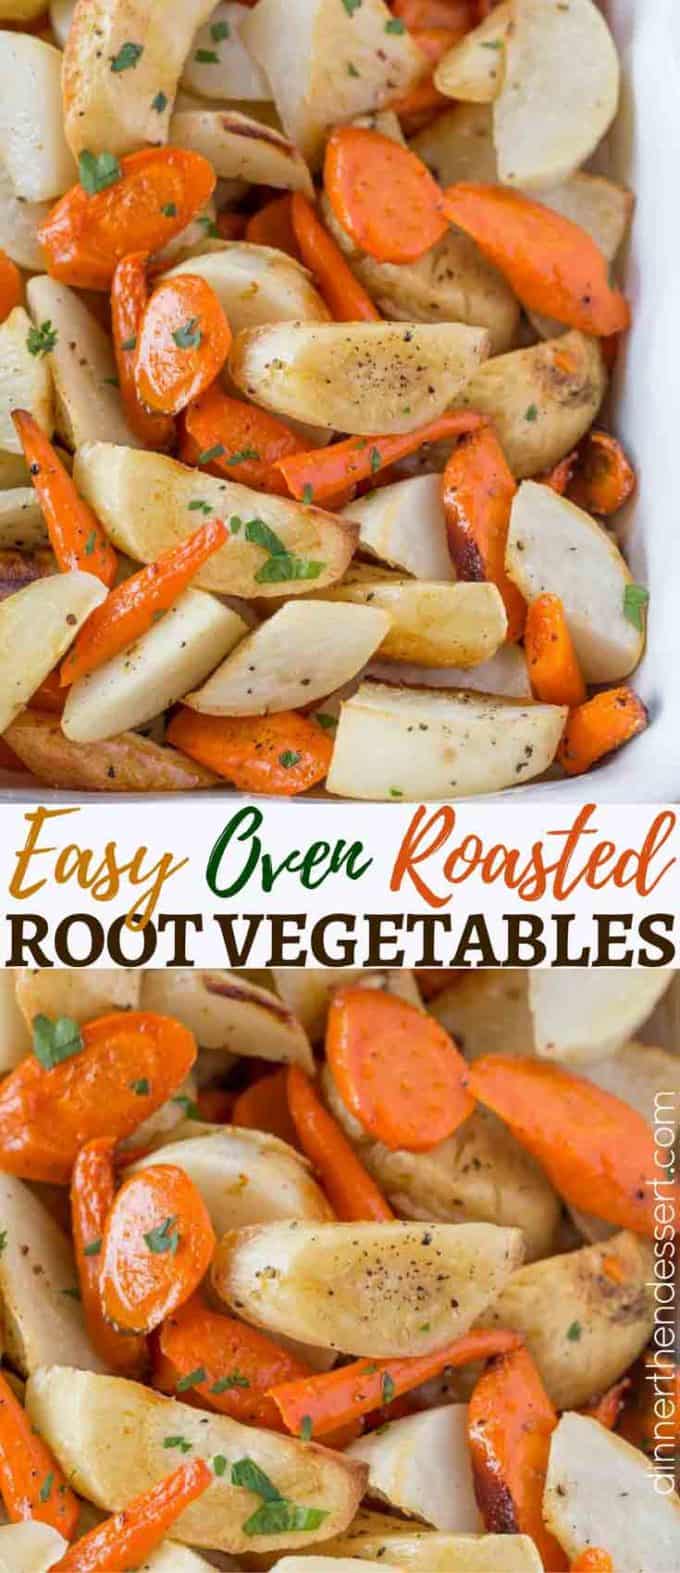  Roasted Root Vegetables are an easy way to mix up your easy weeknight meals and add in some new flavors without any extra effort.